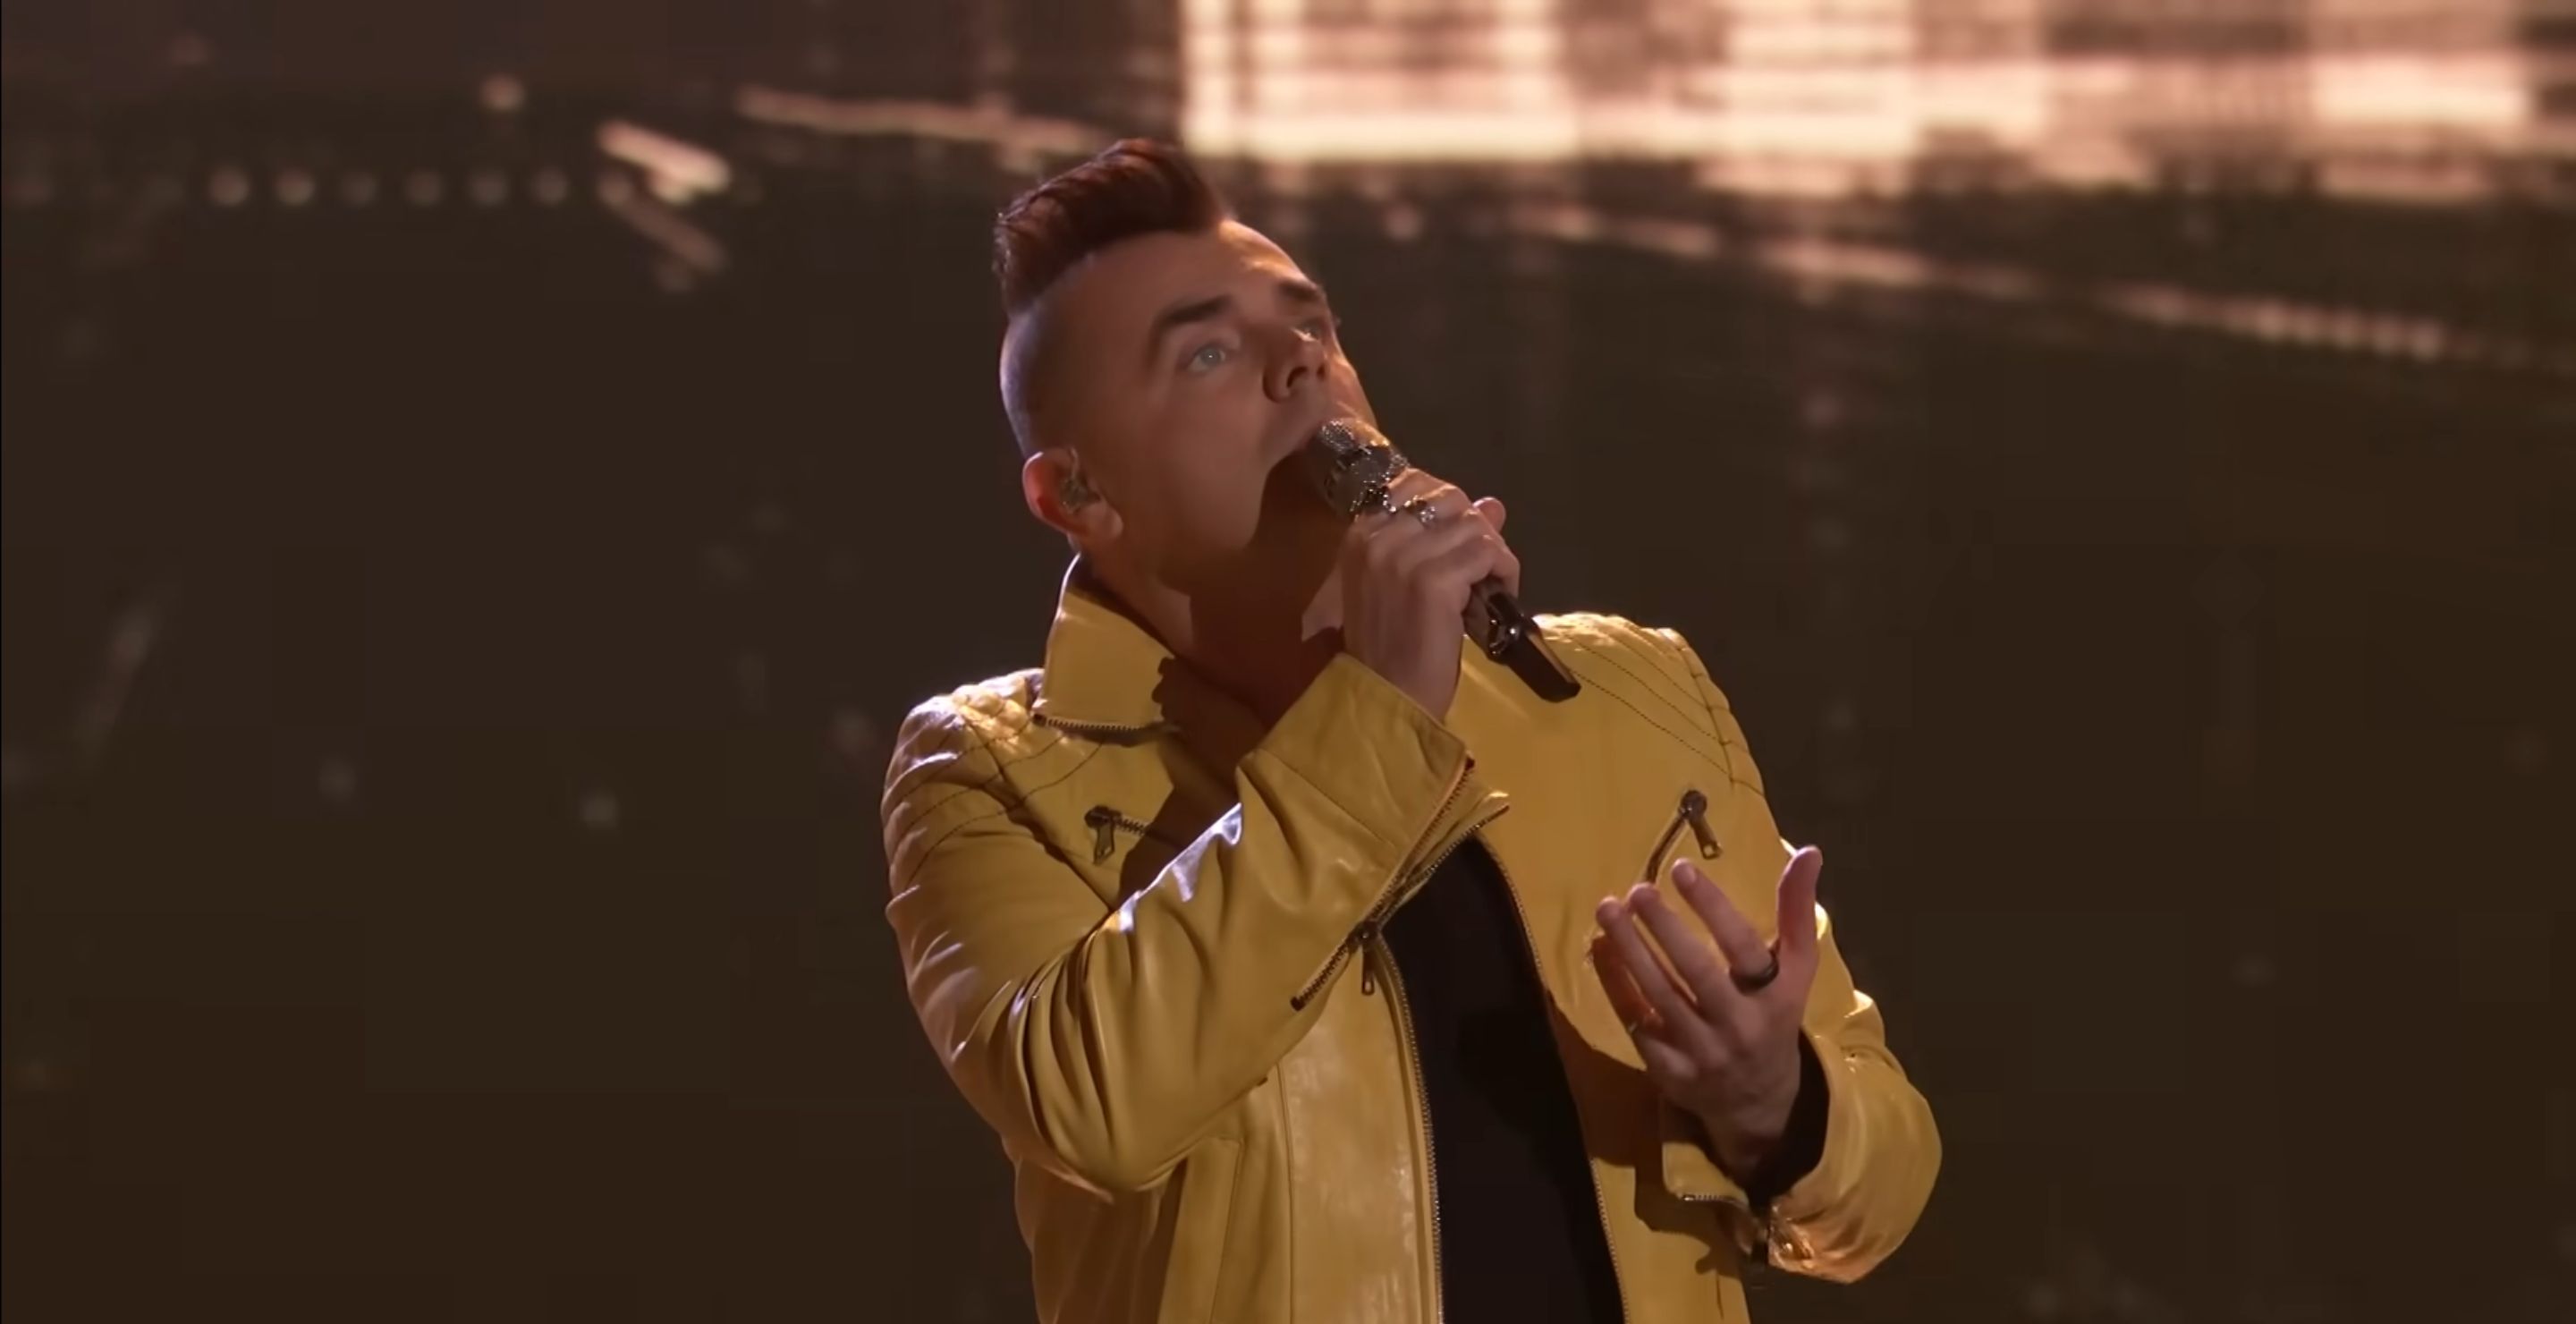 'The Voice' Fans Are Upset About The Top Five Finalists After Devastating Eliminations